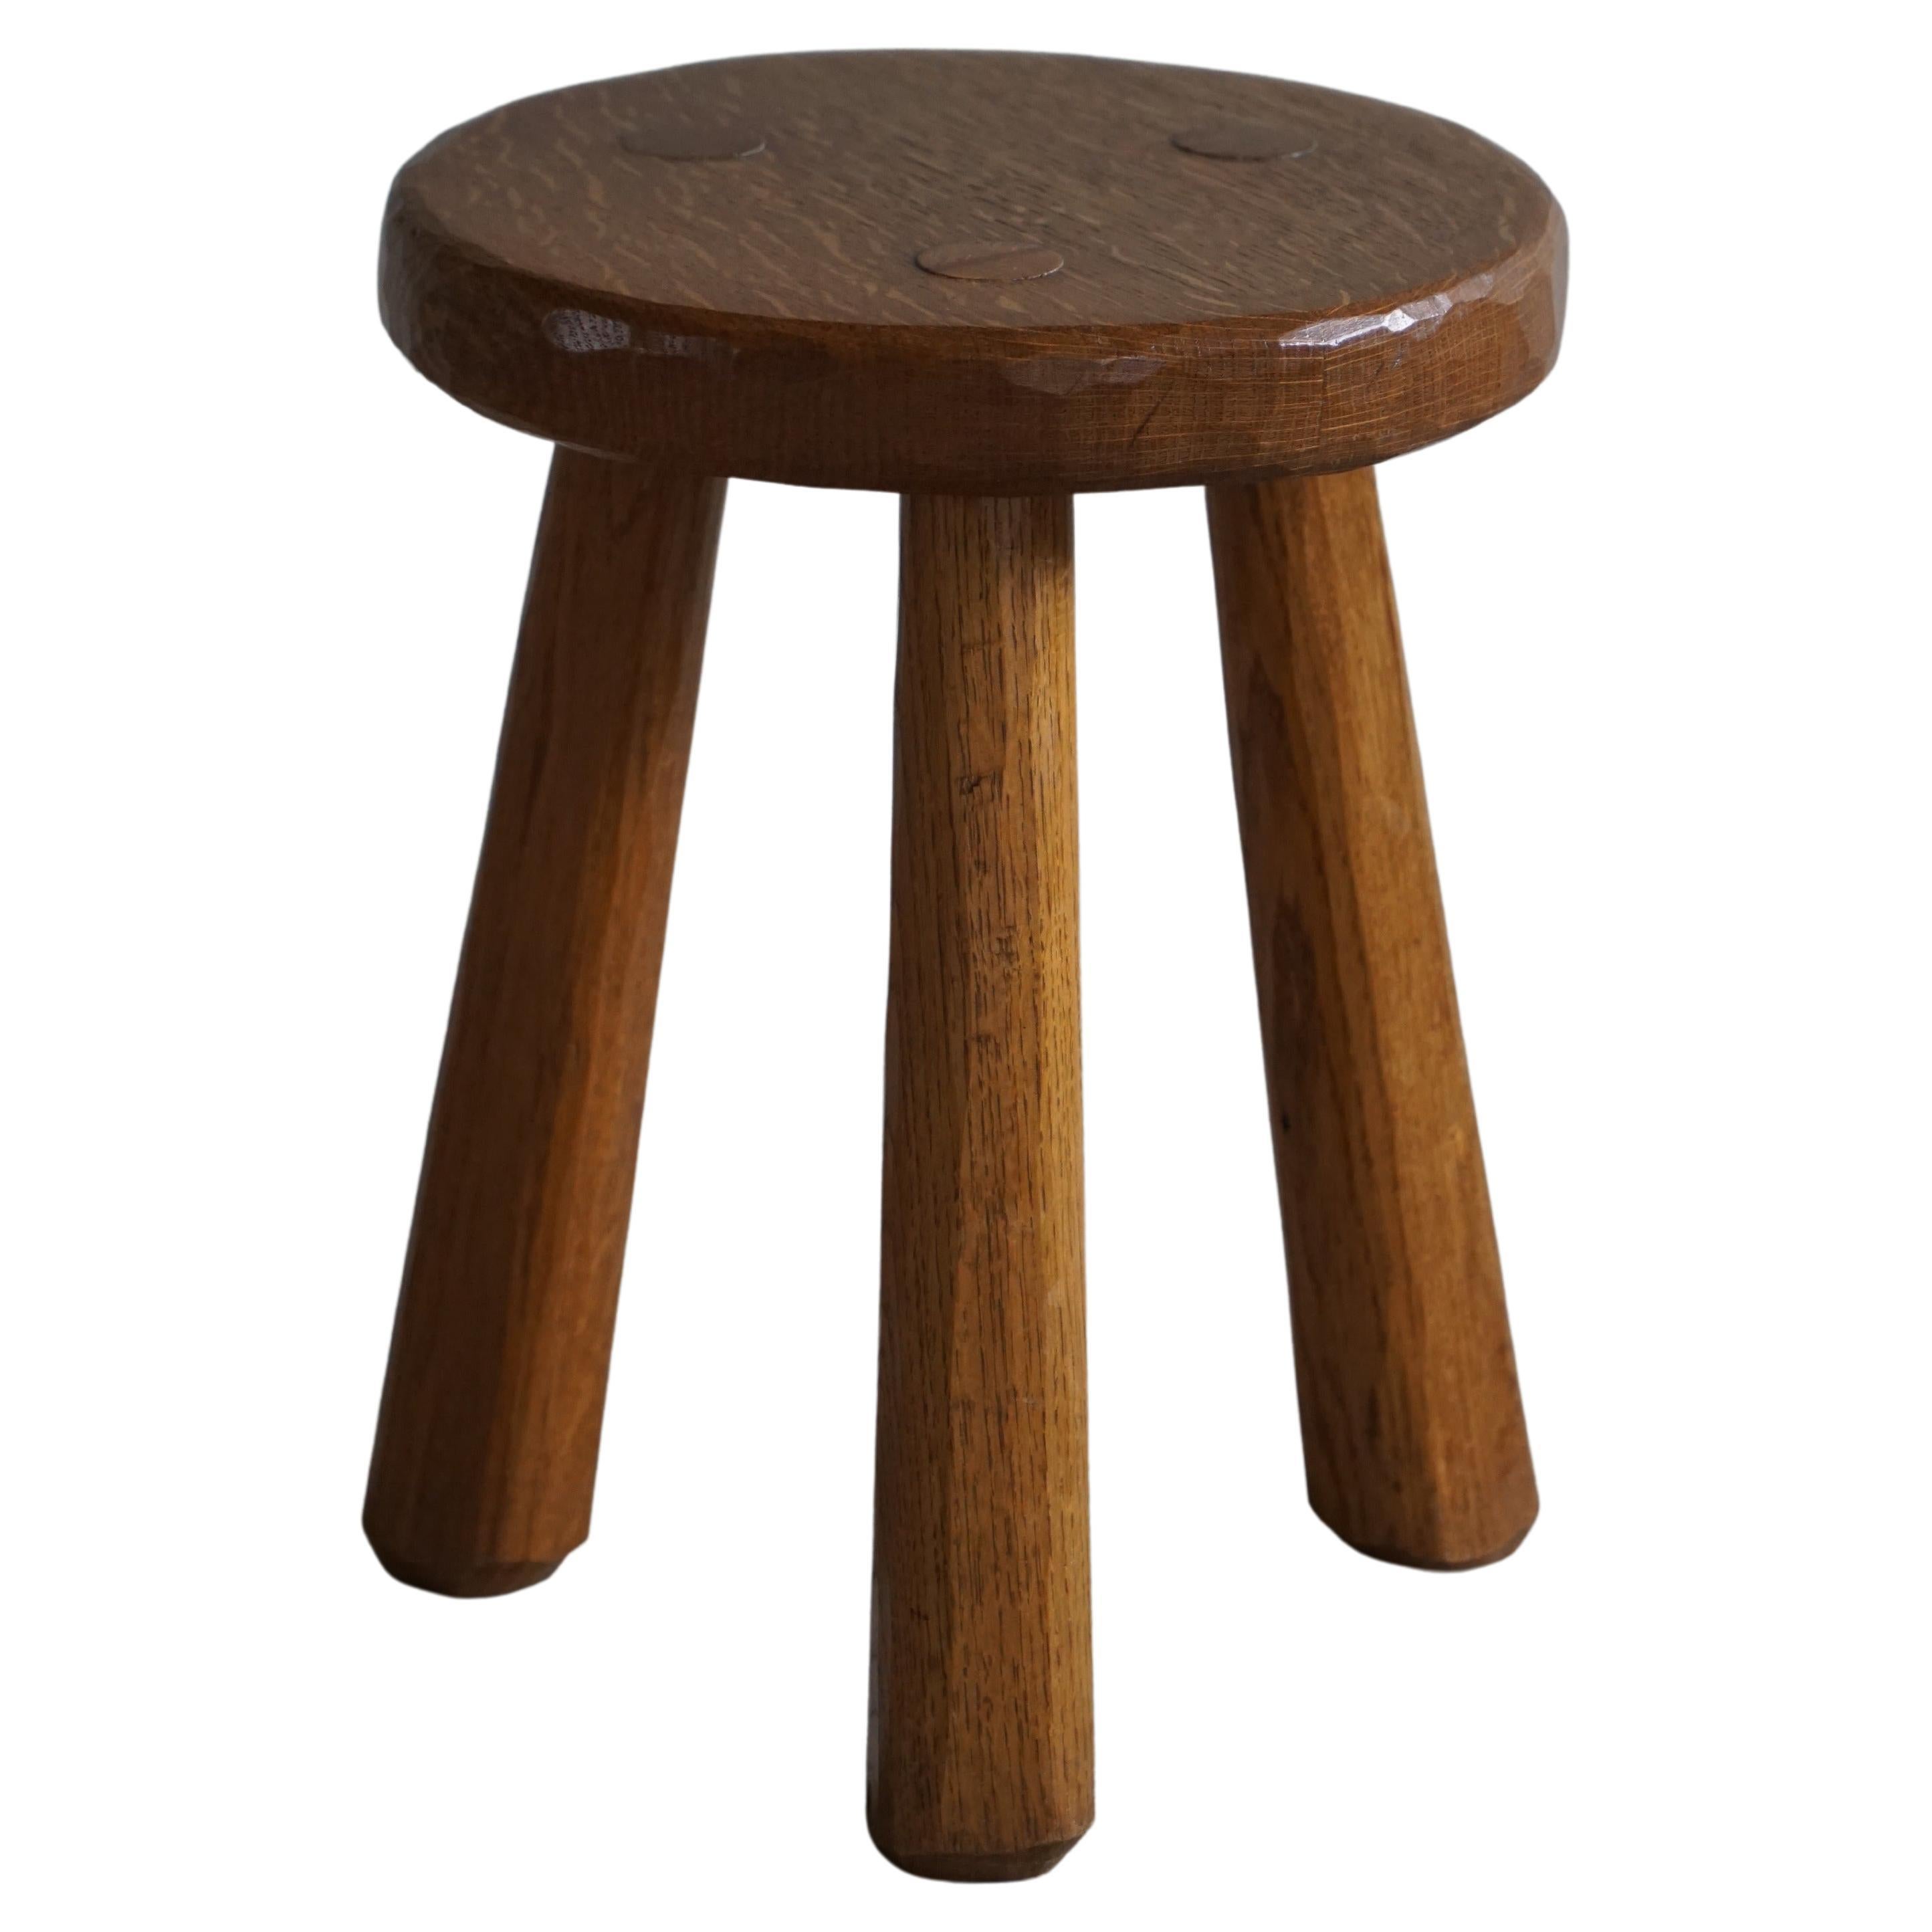 Tripod Stool in Solid Oak, by a Swedish Cabinetmaker, Midcentury, circa 1960s